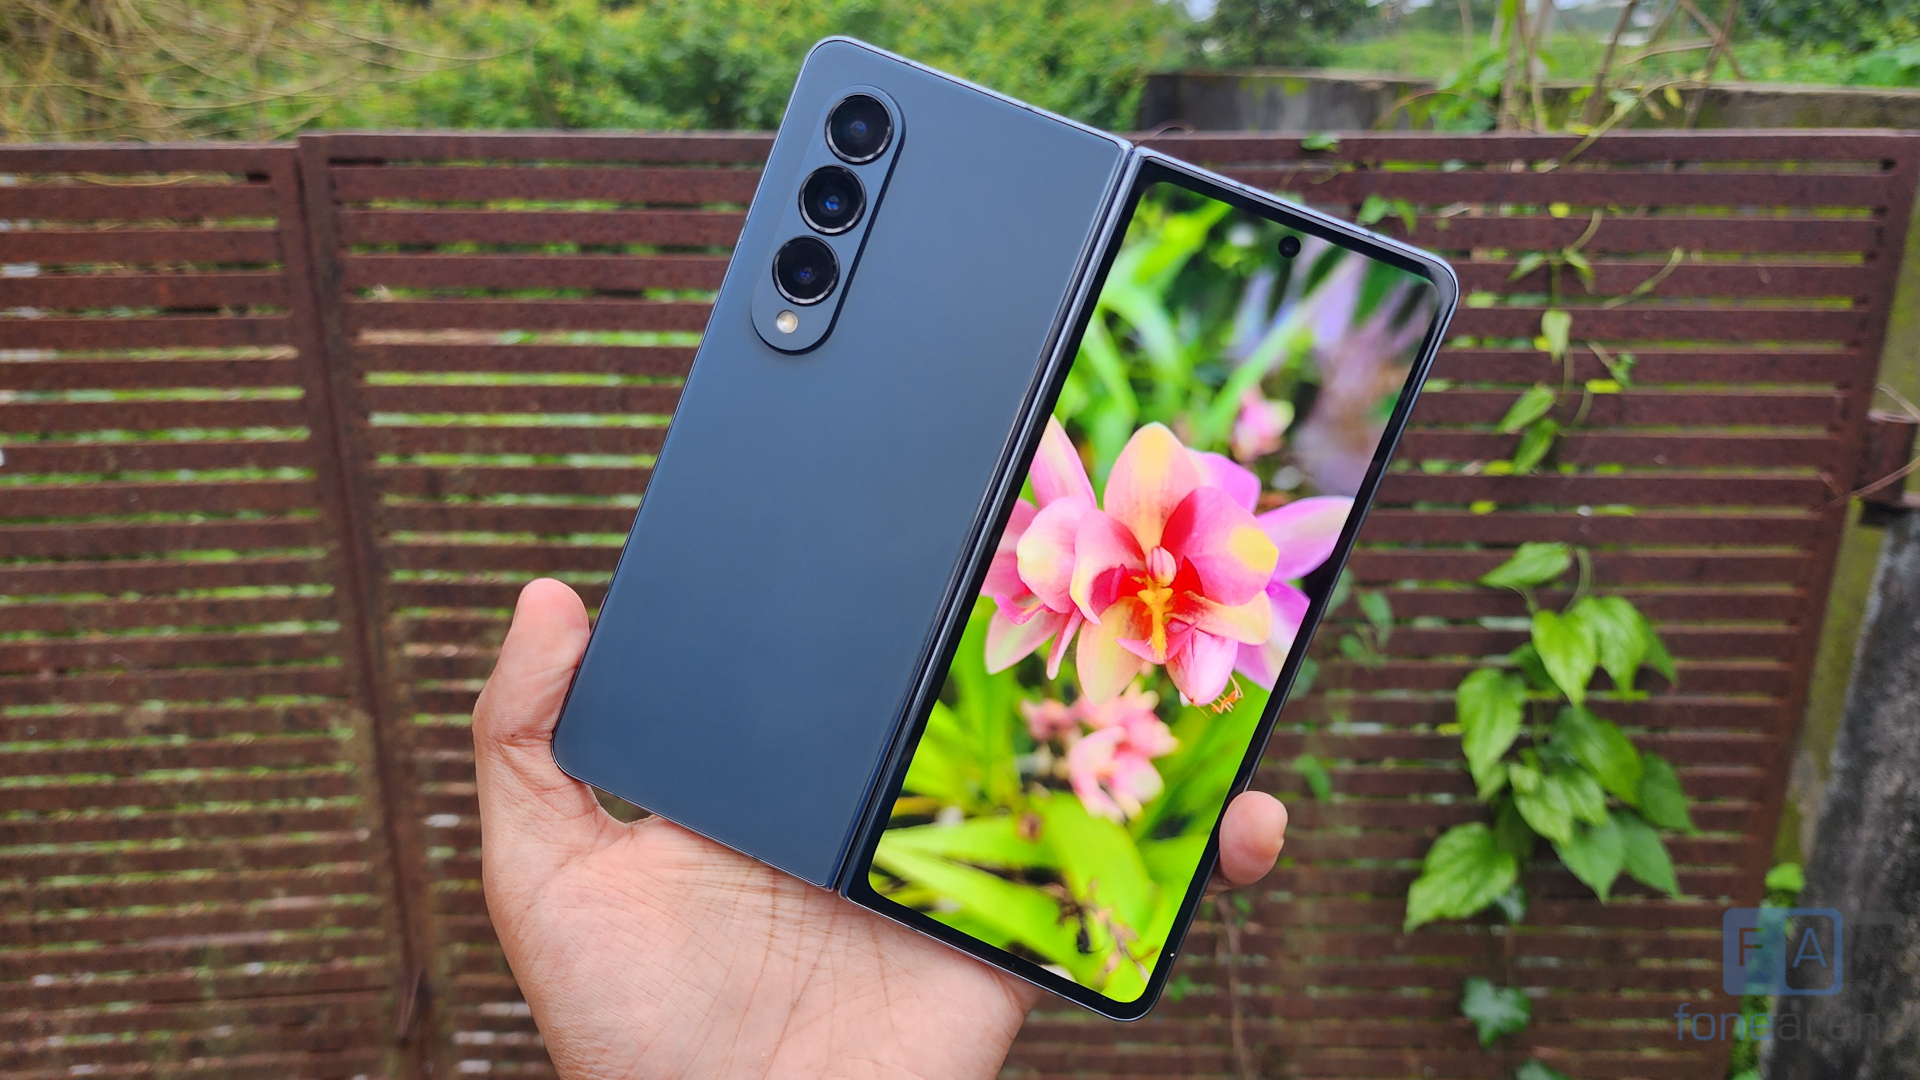 Samsung Galaxy Z Fold4 Review: A refined foldable experience